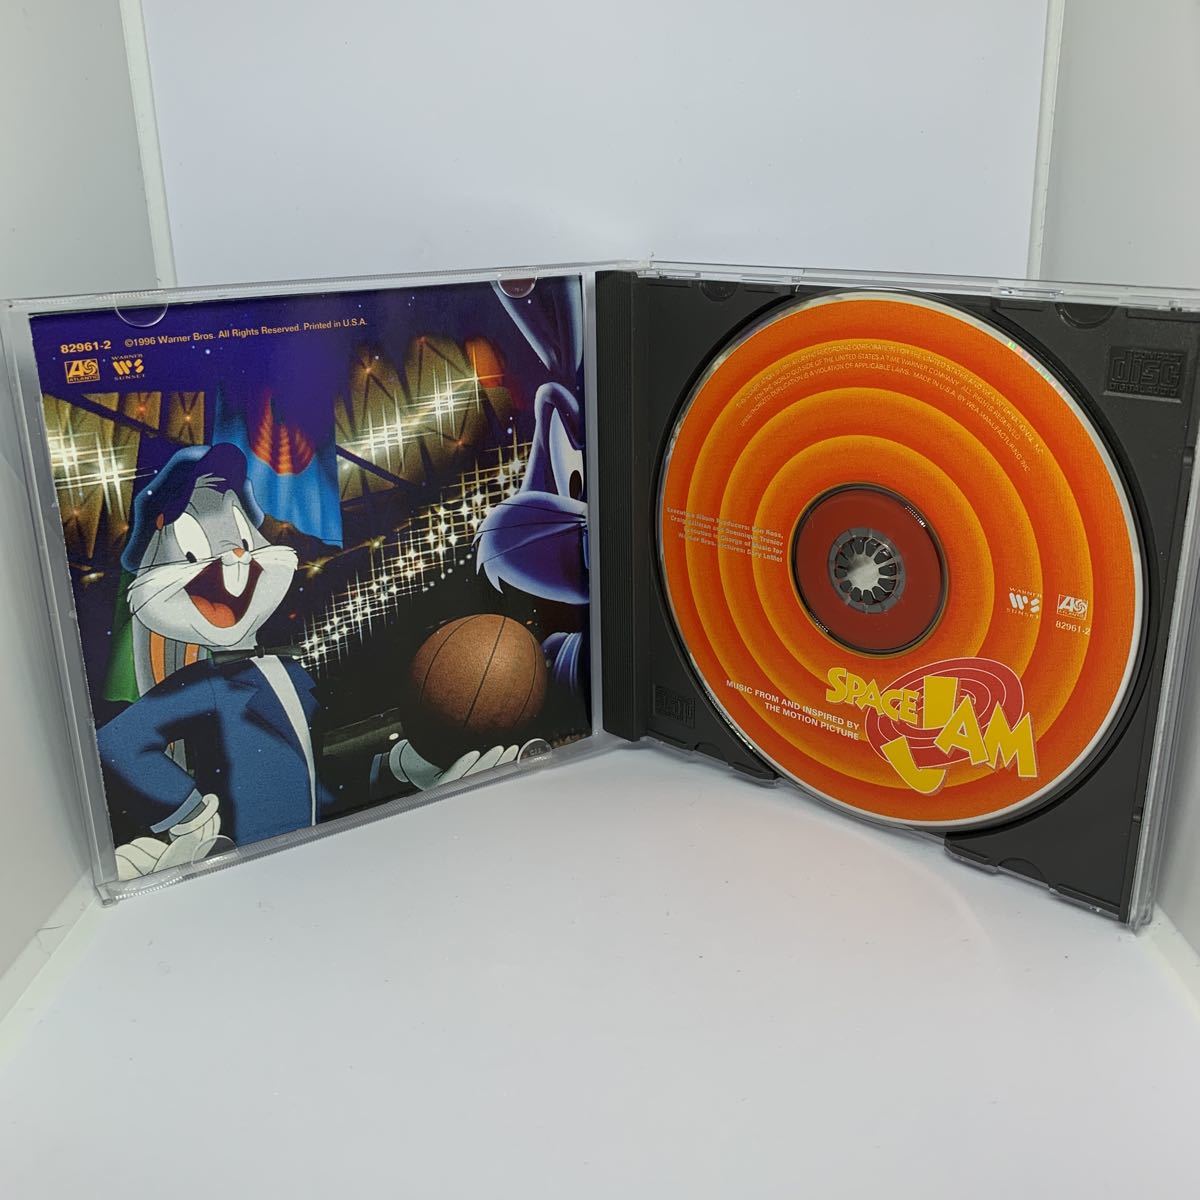 Music From And Inspired By The Space Jam Motion Picture 中古CD 輸入盤_画像3